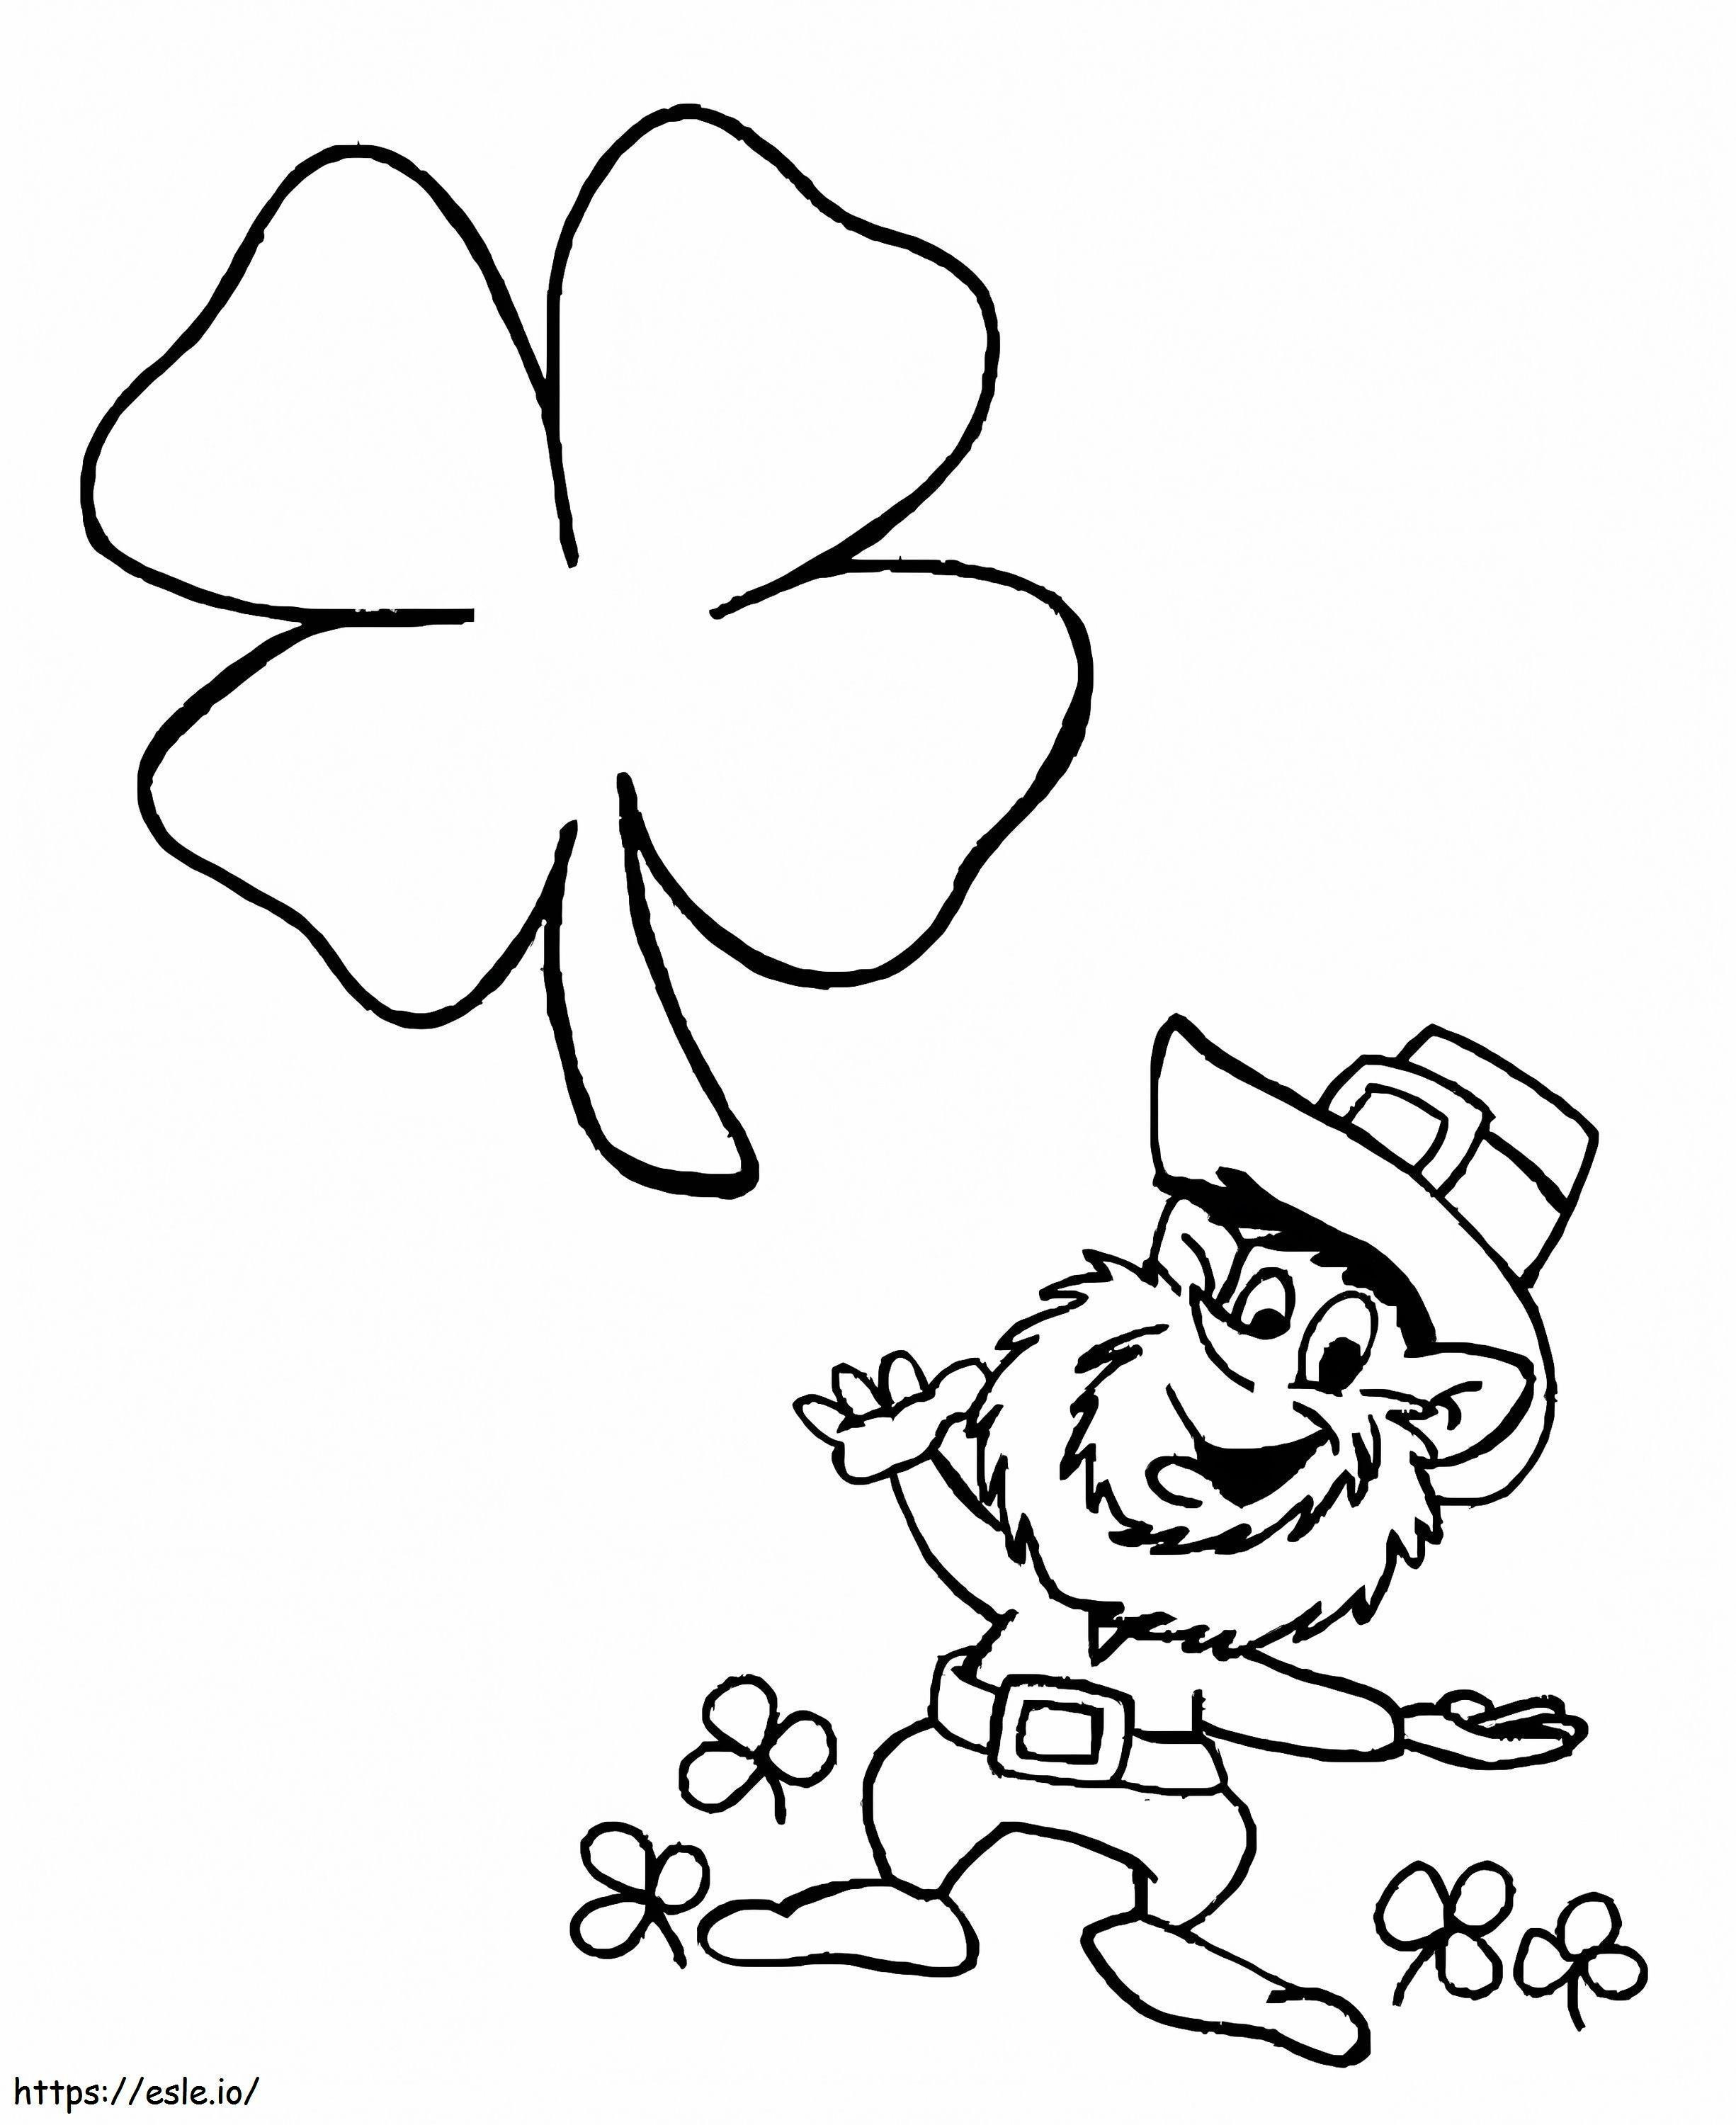 Clover Cartoon coloring page